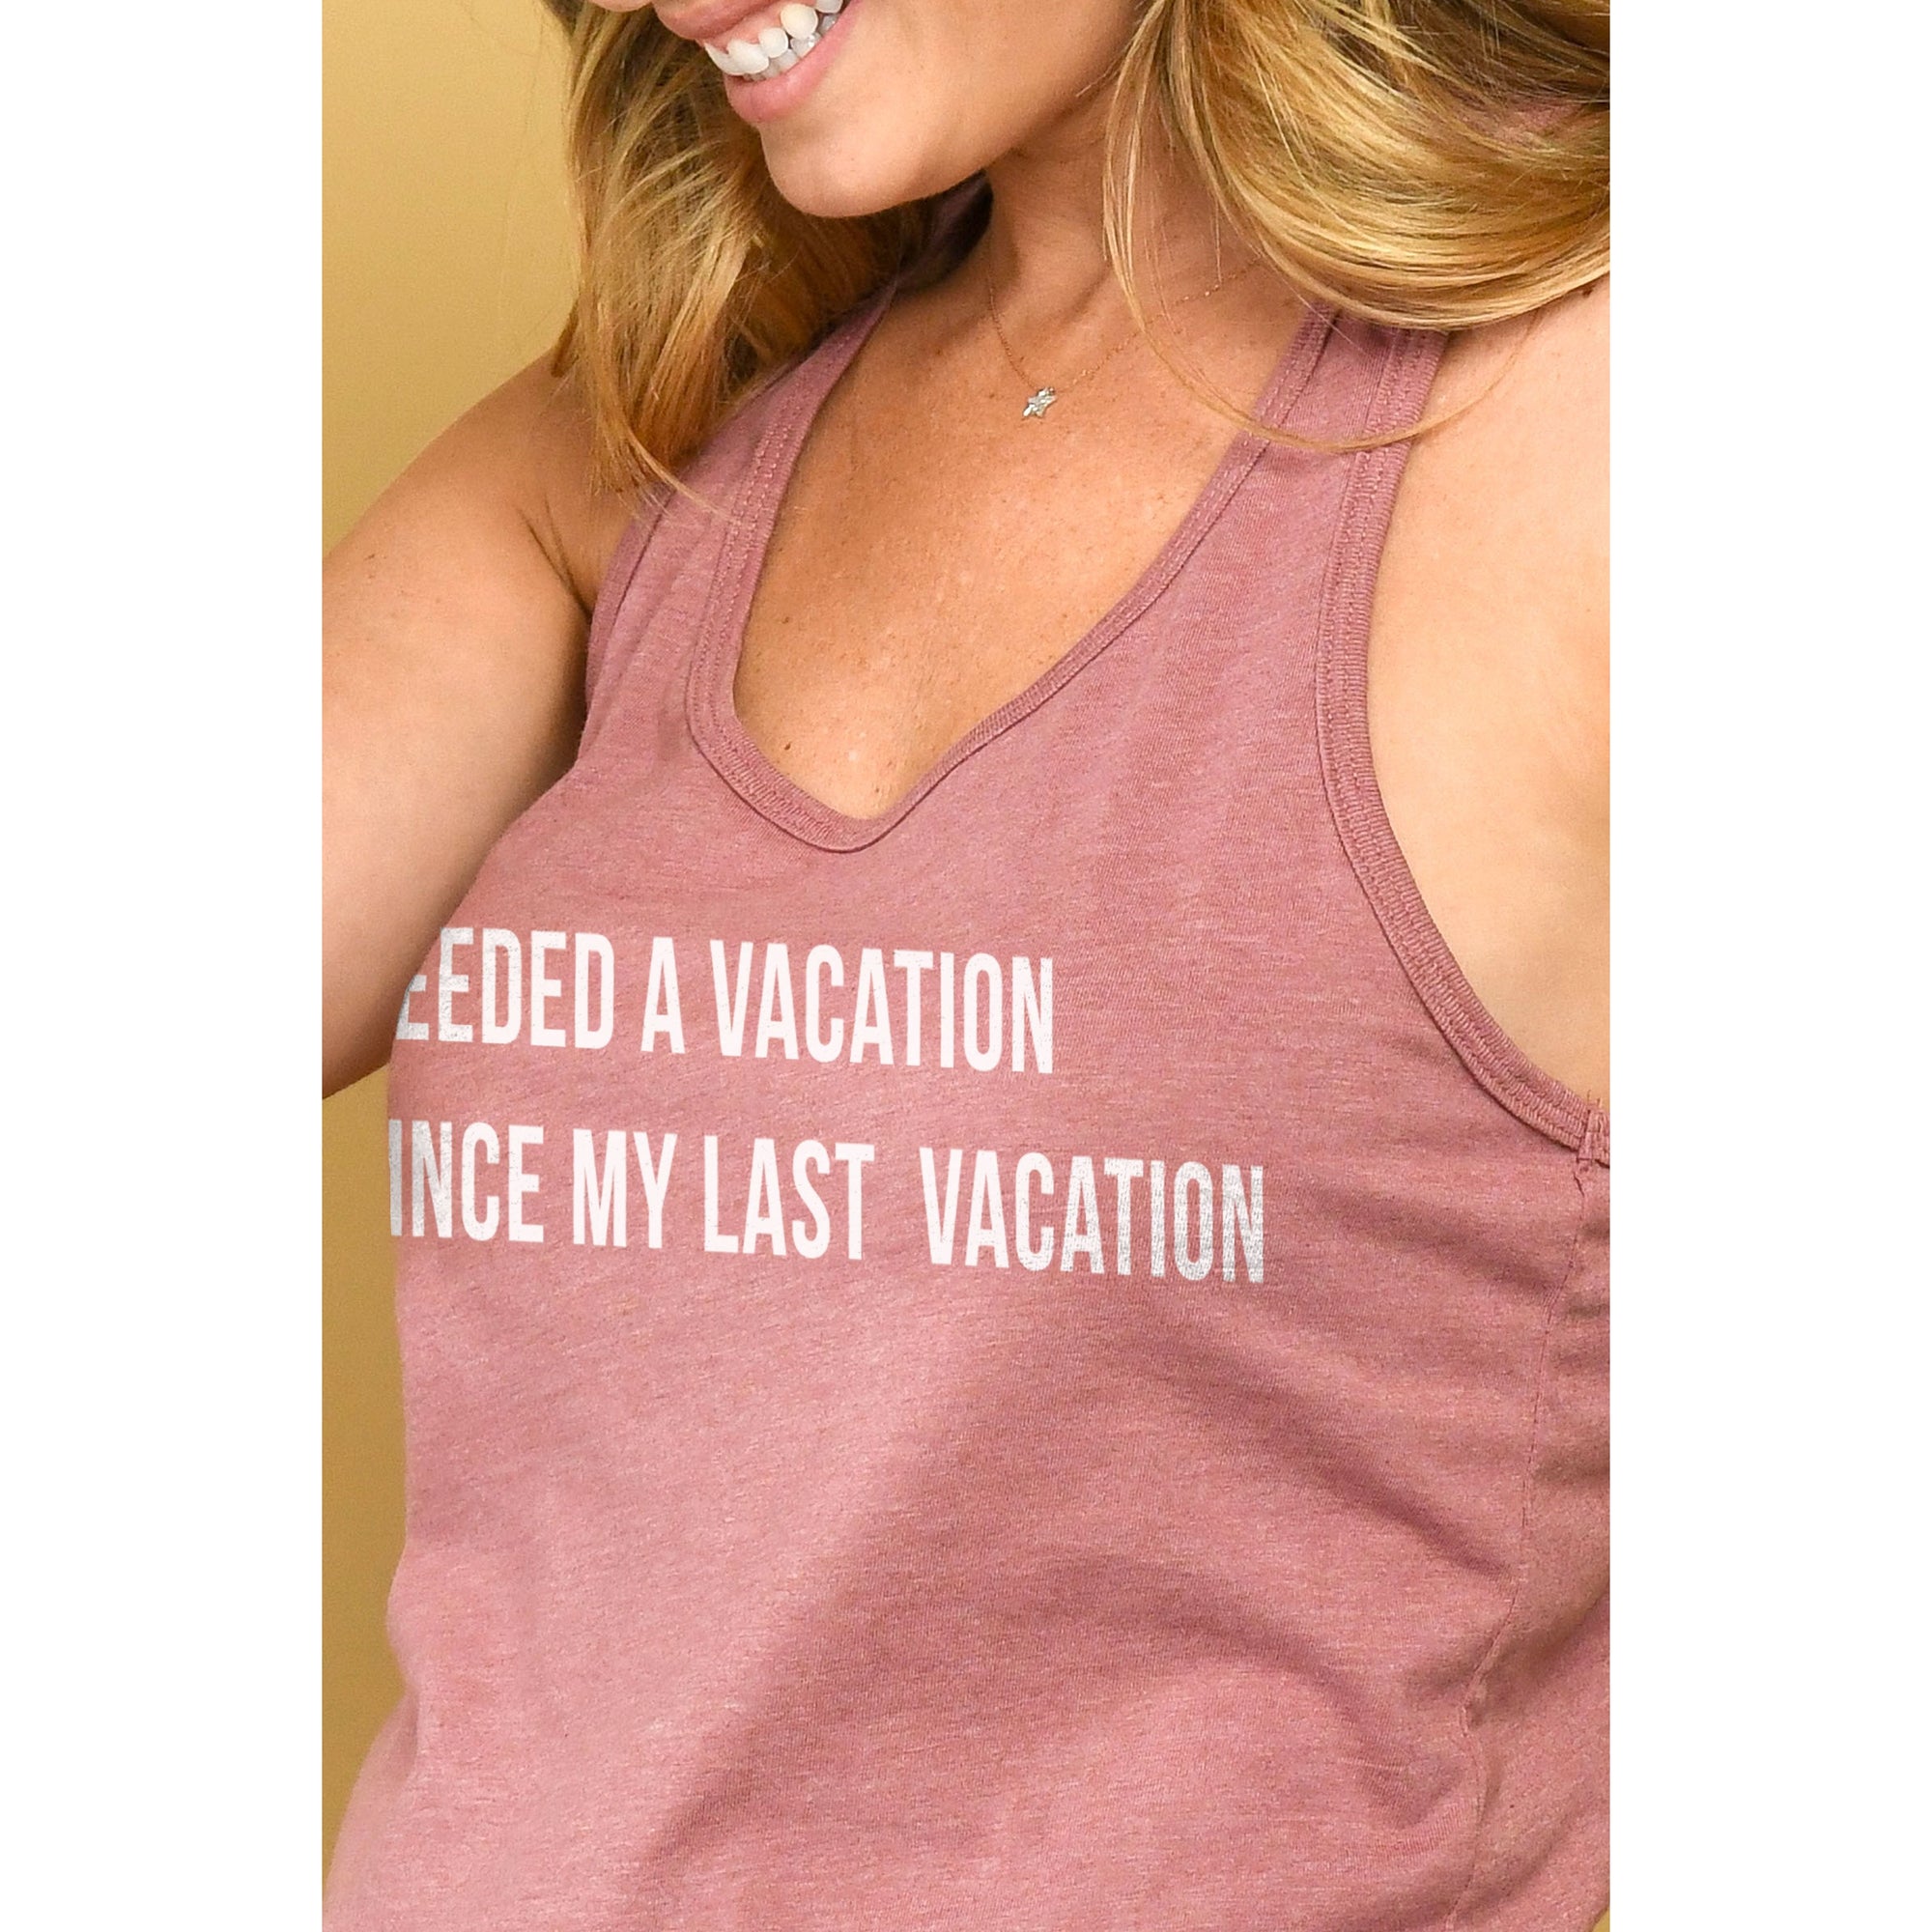 Needed A Vacation Since My Last Vacation - thread tank | Stories you can wear.